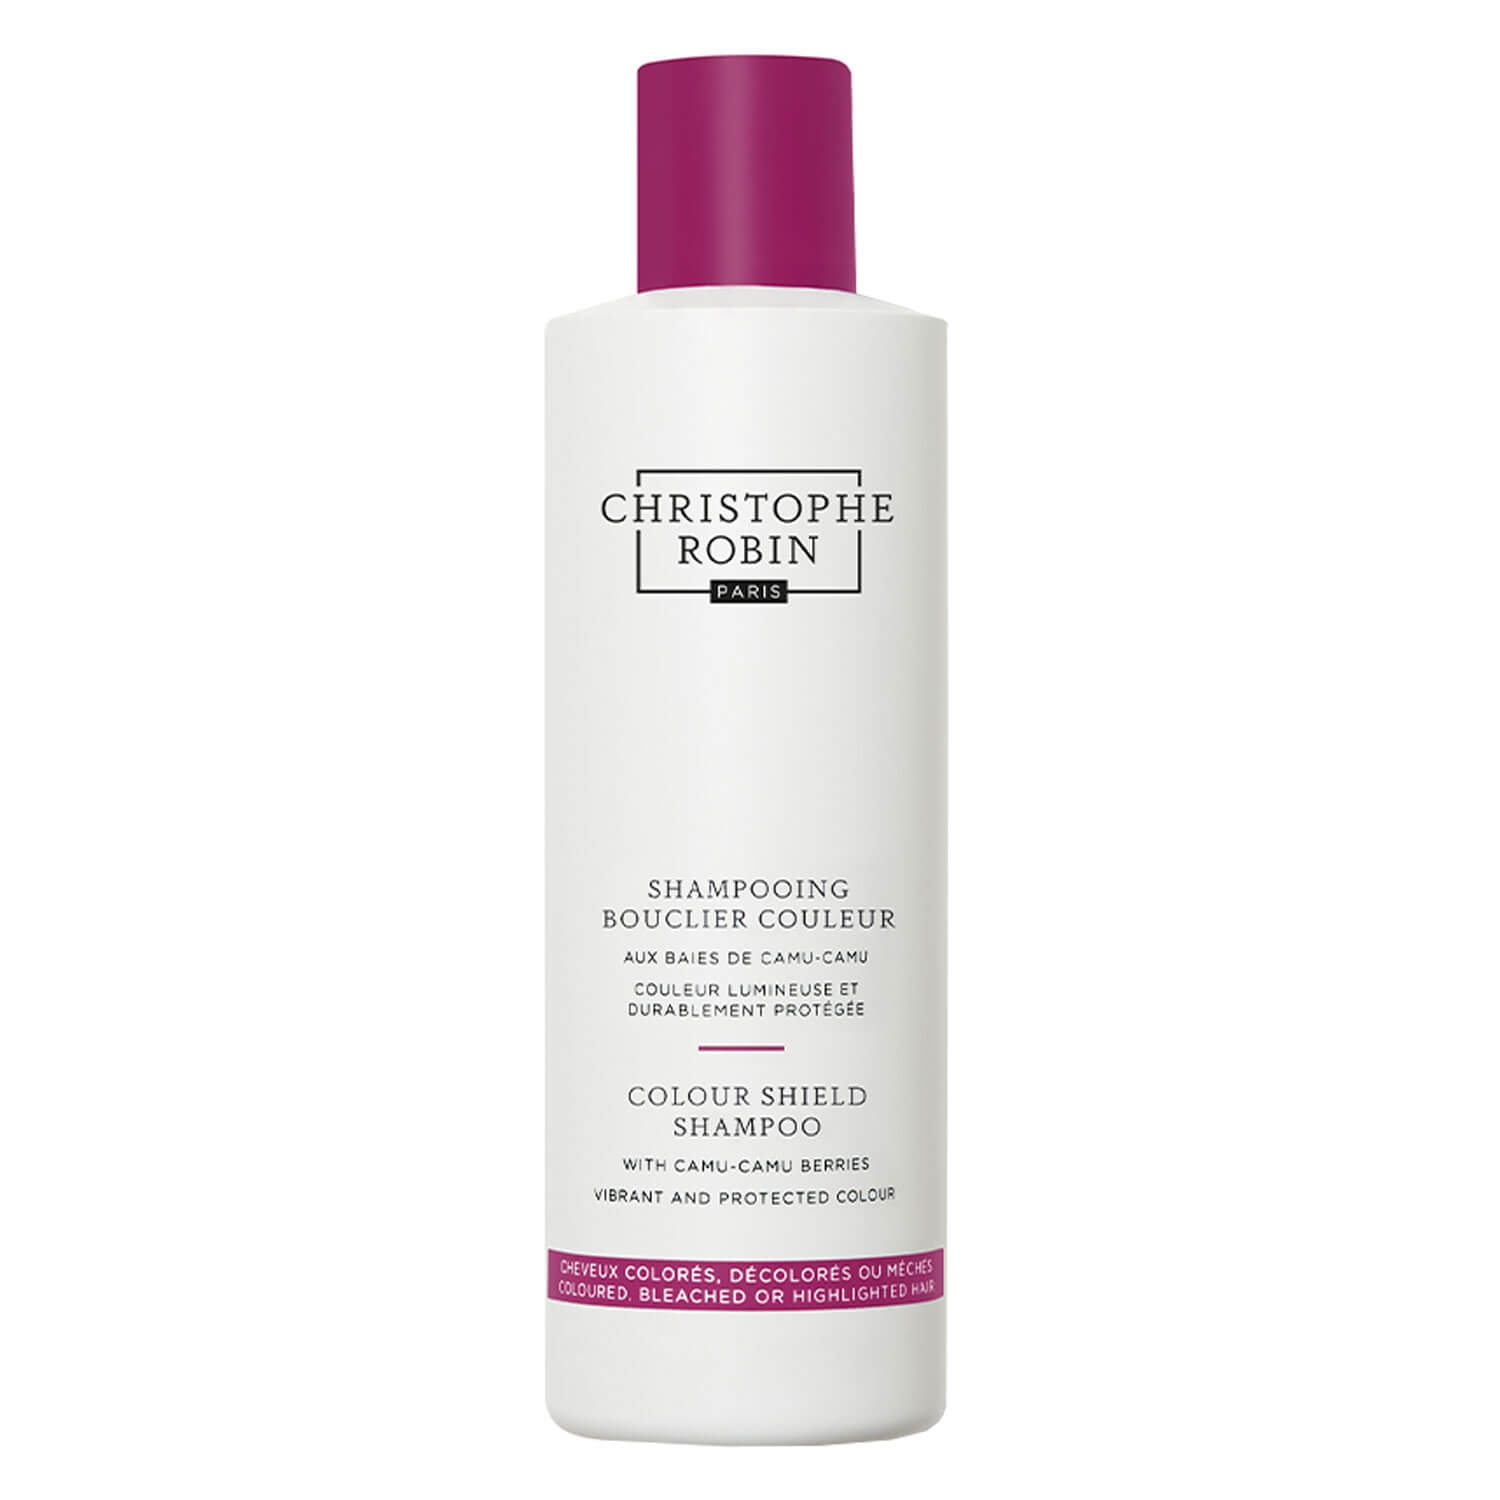 Product image from Christophe Robin - Shampooing Bouclier Couleur